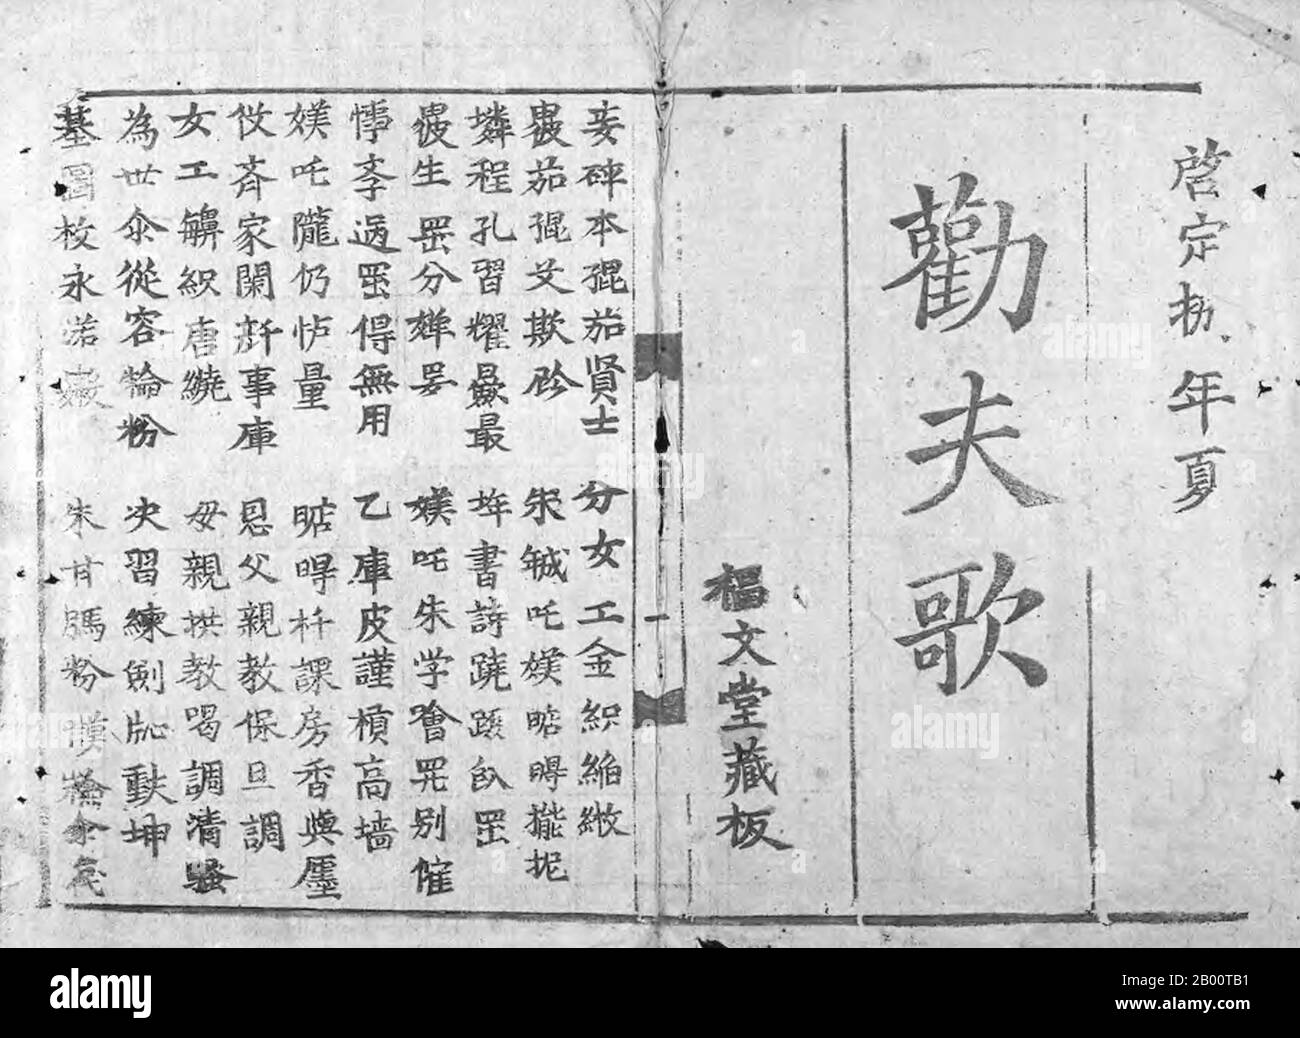 Vietnam: Title page from  a 1923 edition of the Vietnamese classic 'Khuyen phu ca', printed in Han-Nom.  The text concerns a wife’s admonition to her husband as well as the promises of the husband. Chu Nom is an obsolete writing system of the Vietnamese language. It makes use of Chinese characters (known as Han Tu in Vietnamese), and characters coined following the Chinese model. The earliest known example of Chu Nom dates to the 13th century. It was used almost exclusively by the Vietnamese elite, mostly for recording Vietnamese literature. Stock Photo